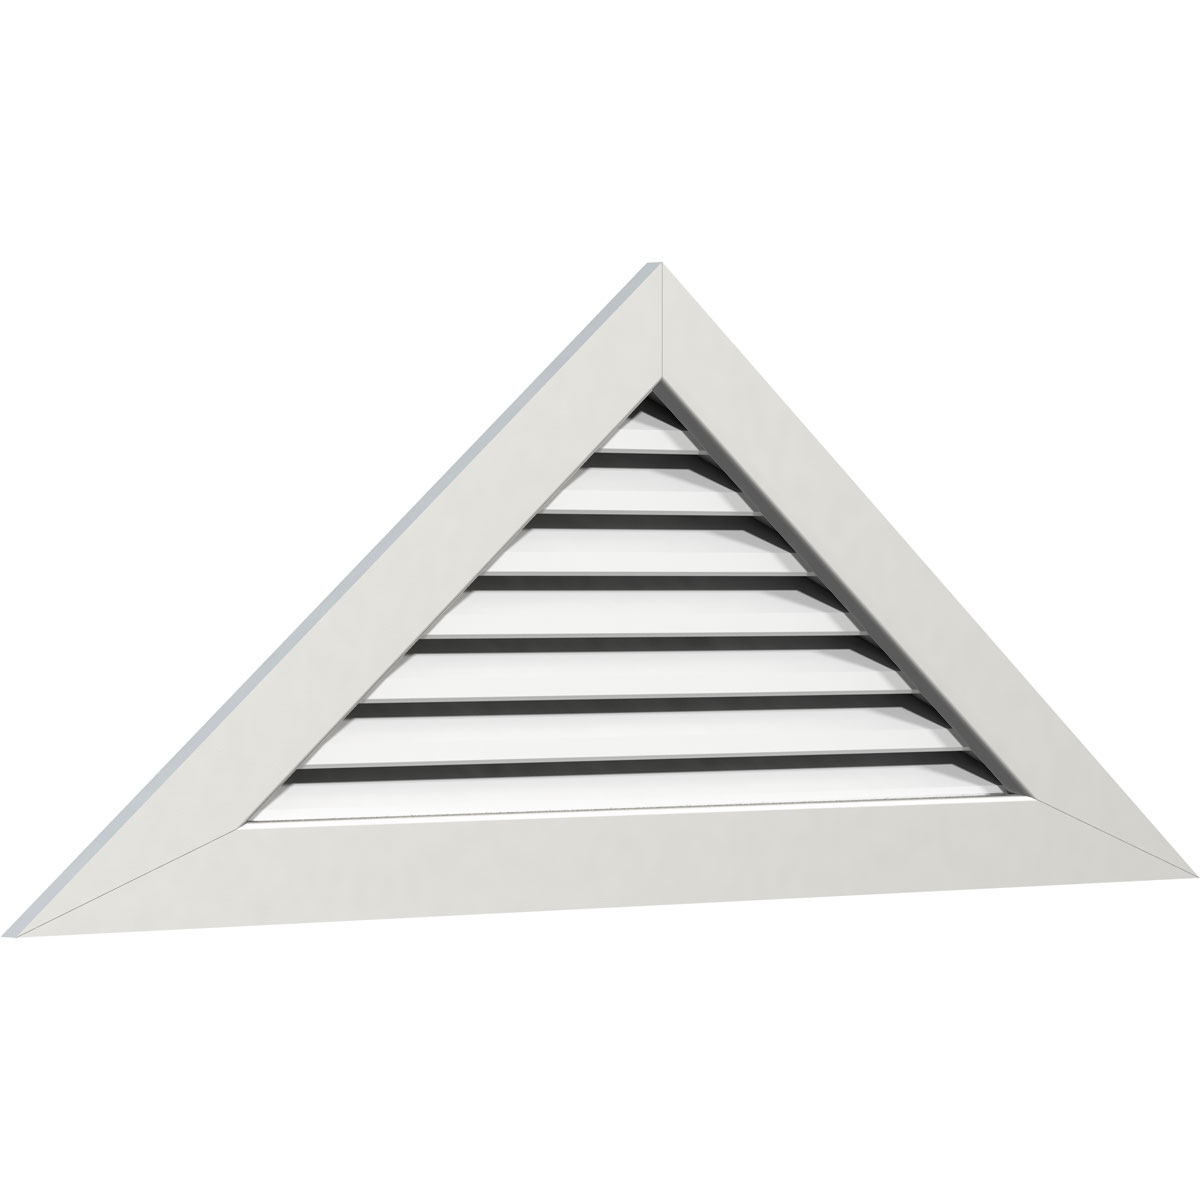 Ekena Millwork 44"W x 14 5/8"H Triangle Gable Vent (60 1/2"W x 20 1/8"H Frame Size) 8/12 Pitch Functional, PVC Gable Vent with 1" x 4" Flat Trim Frame - image 2 of 14